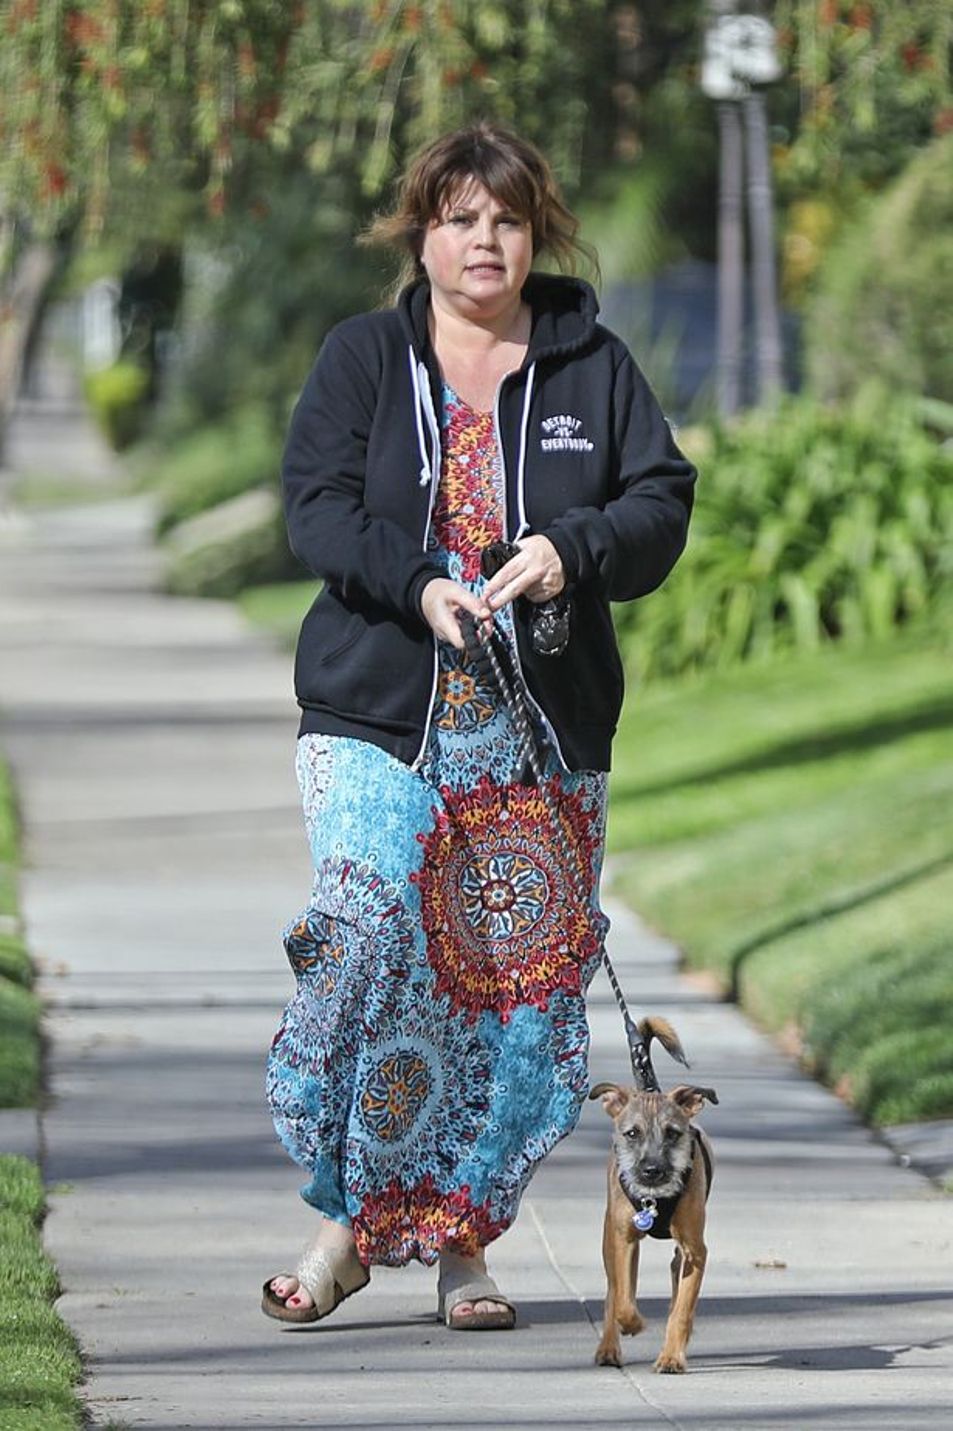 Yasmine-Bleeth-51-makes-a-rare-public-outing-as-she-takes-her-pet-dog